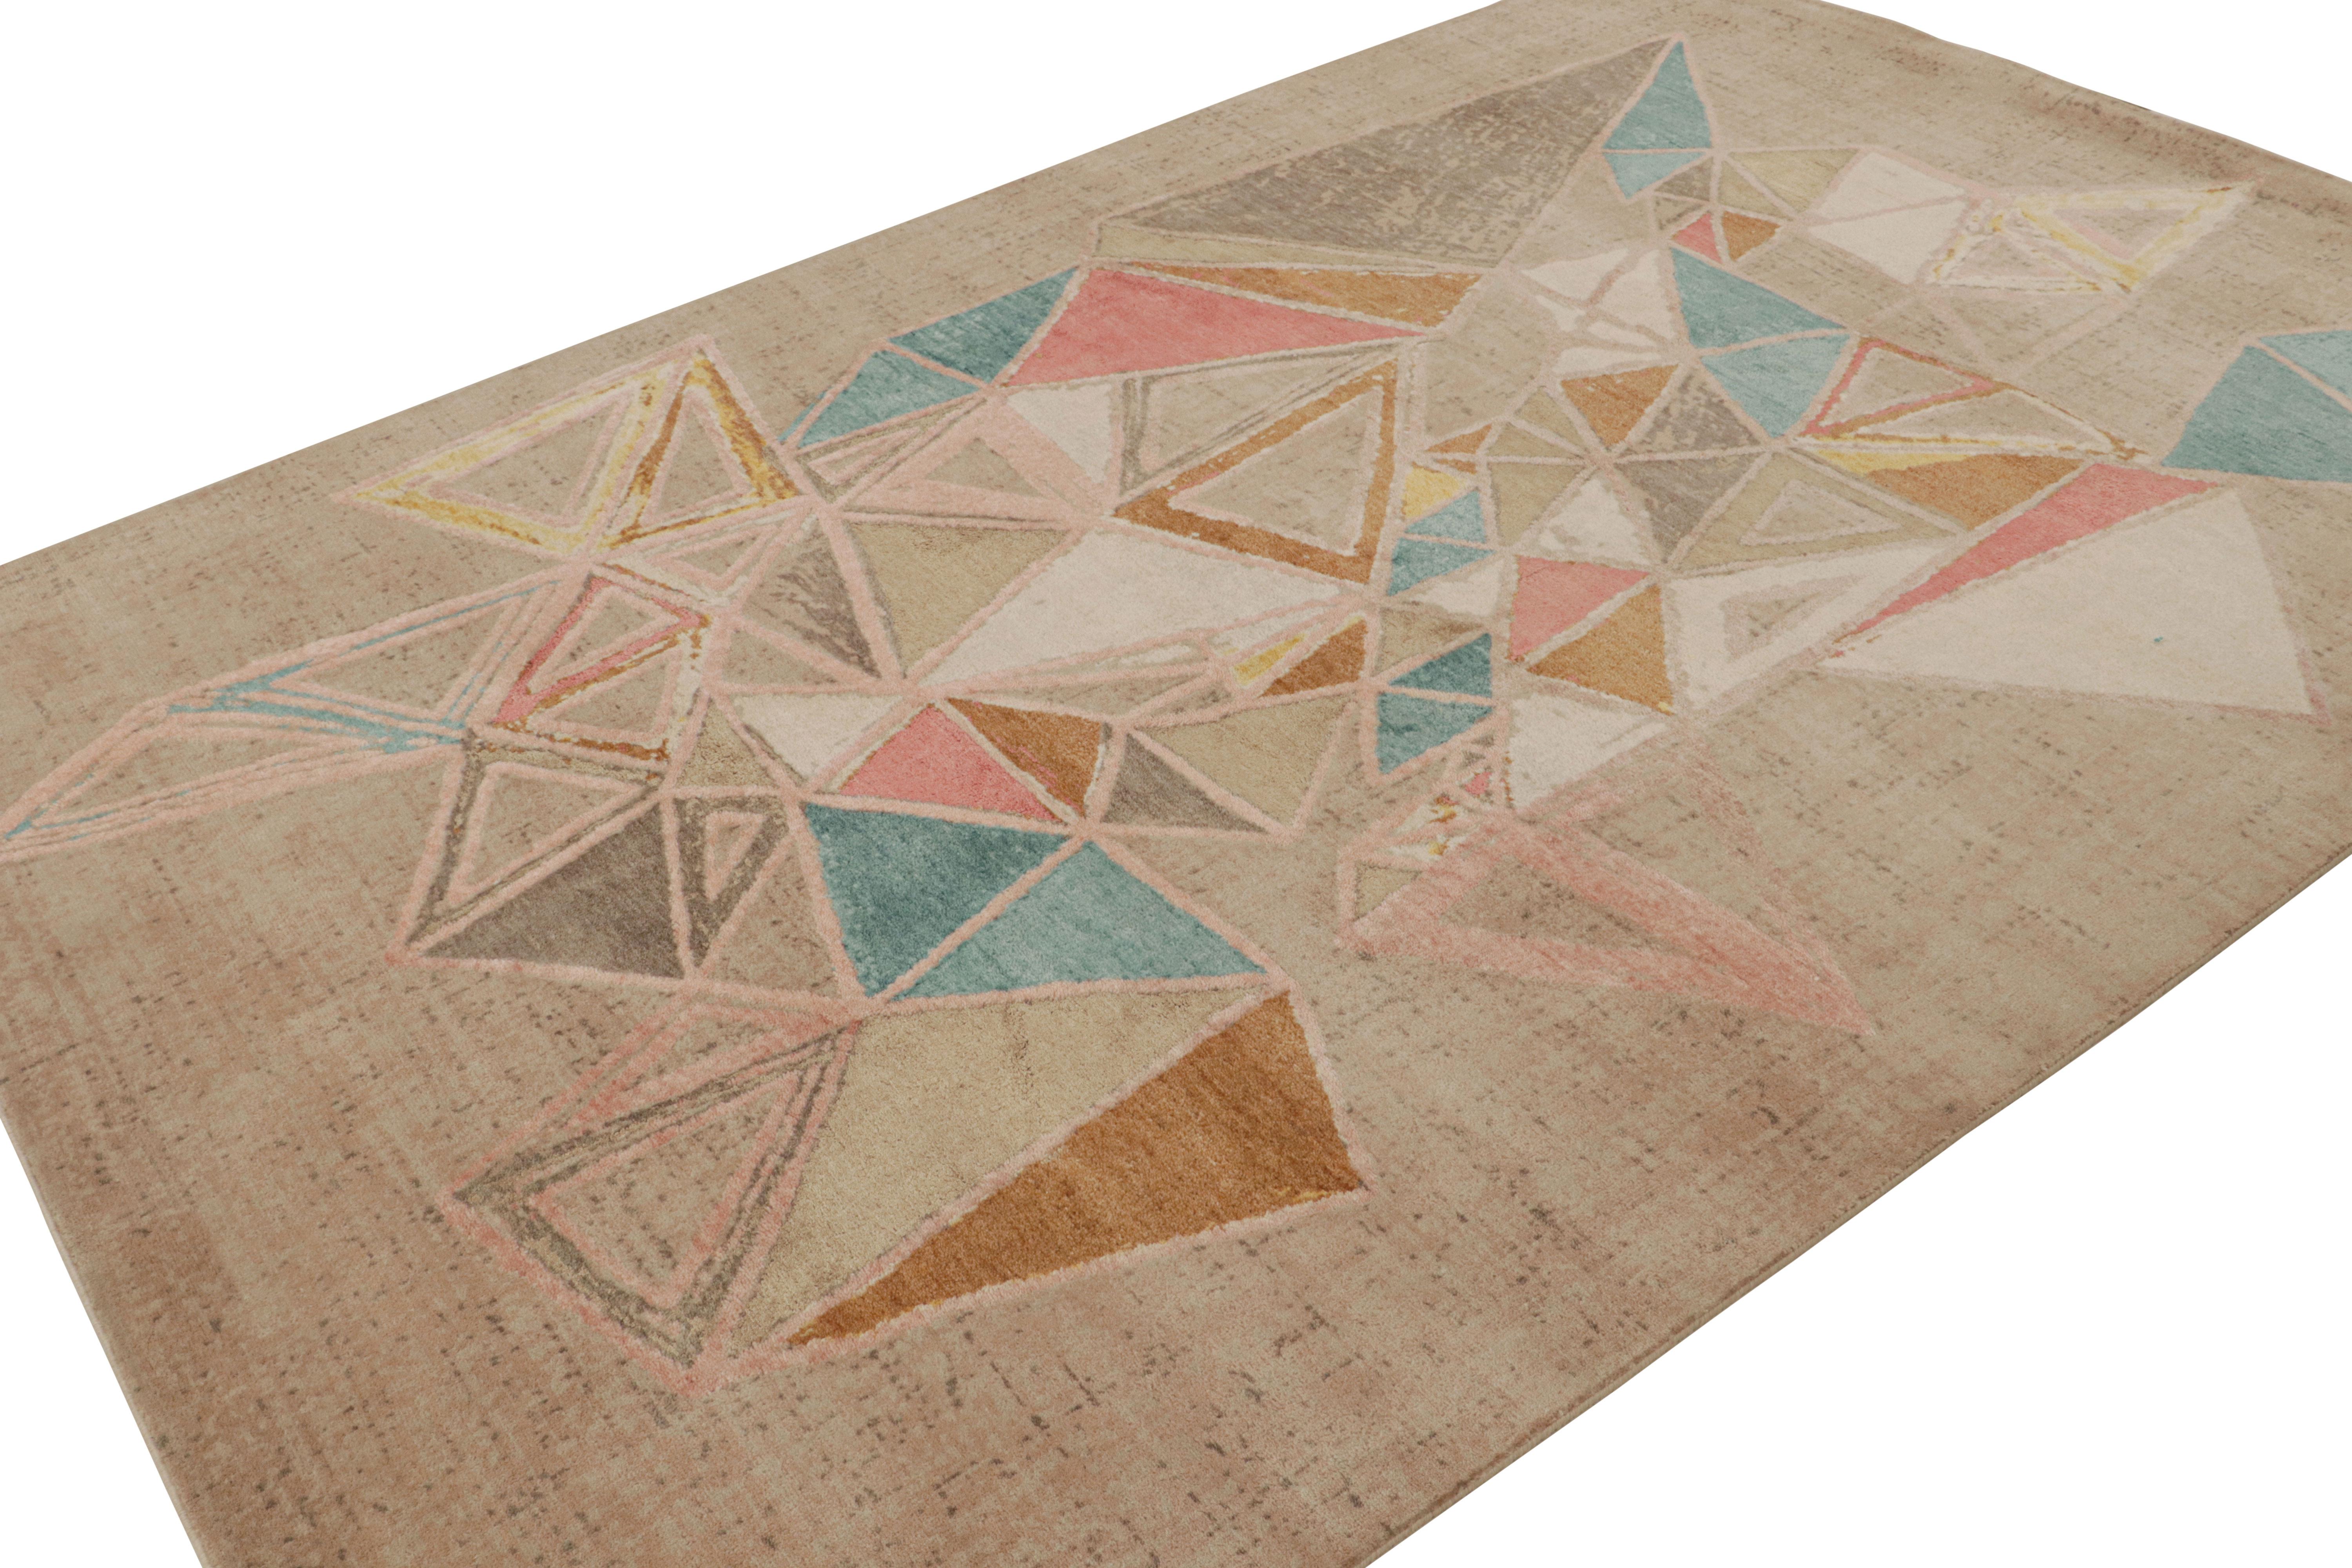 This 6x9 modern rug is a new unveiling from the Mid-Century Modern rug collection by Rug & Kilim—hand-knotted in wool and silk.

On the design: 

Inspired from a rare modernism, this rug further exemplifies our mid-century modern take in the